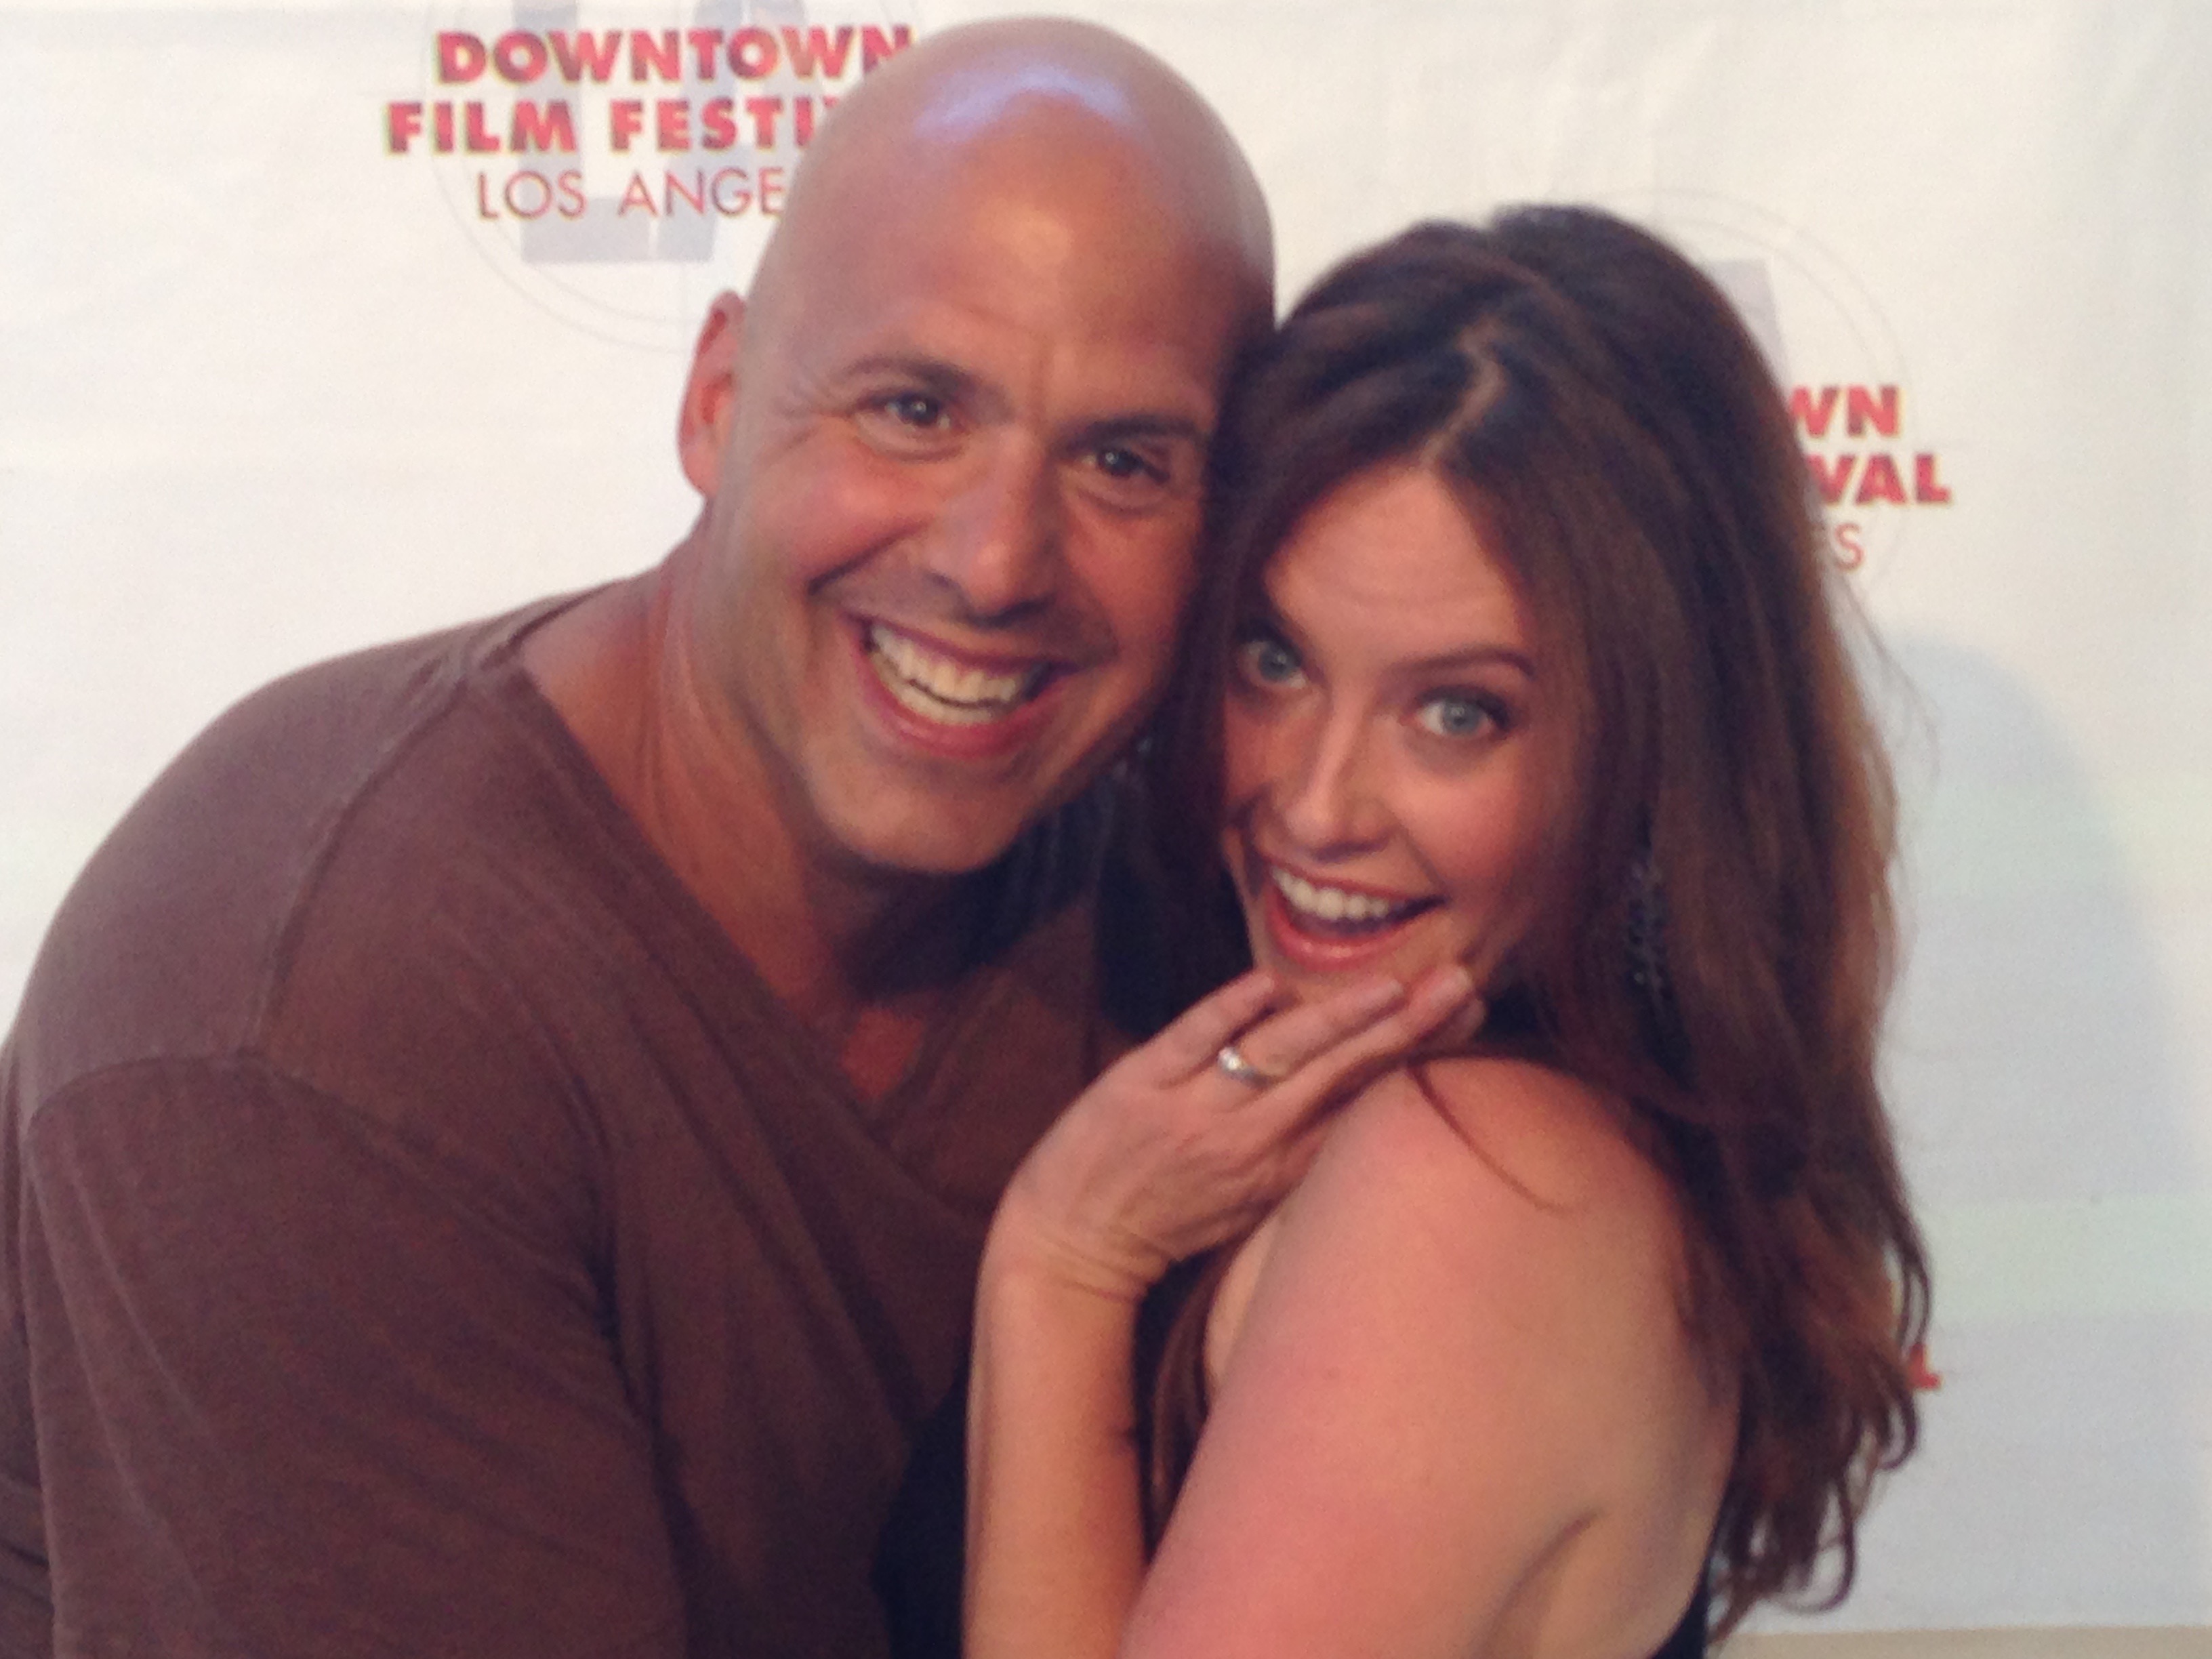 Joe Basile and Melissa Archer at the Downtown Film Festival, Los Angeles. WEST END